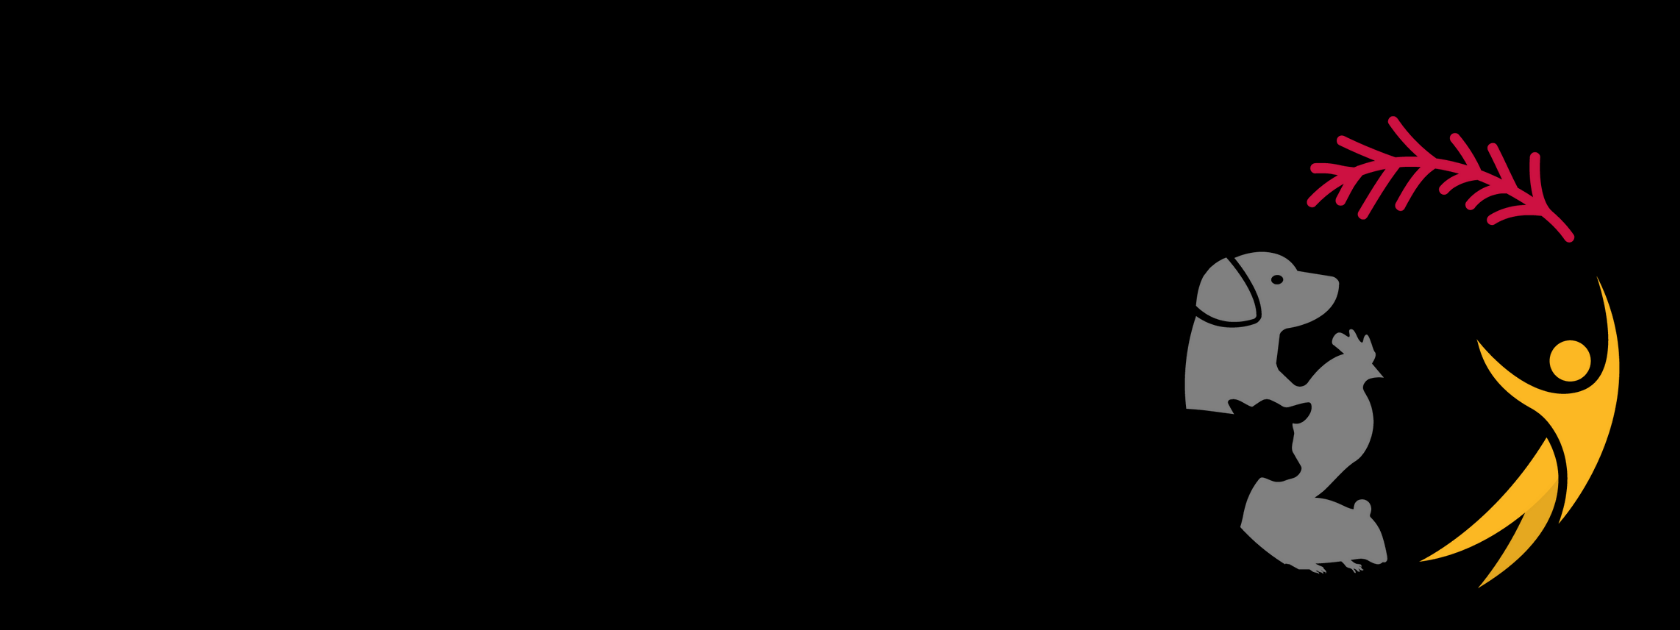 A black banner including the One Health logo